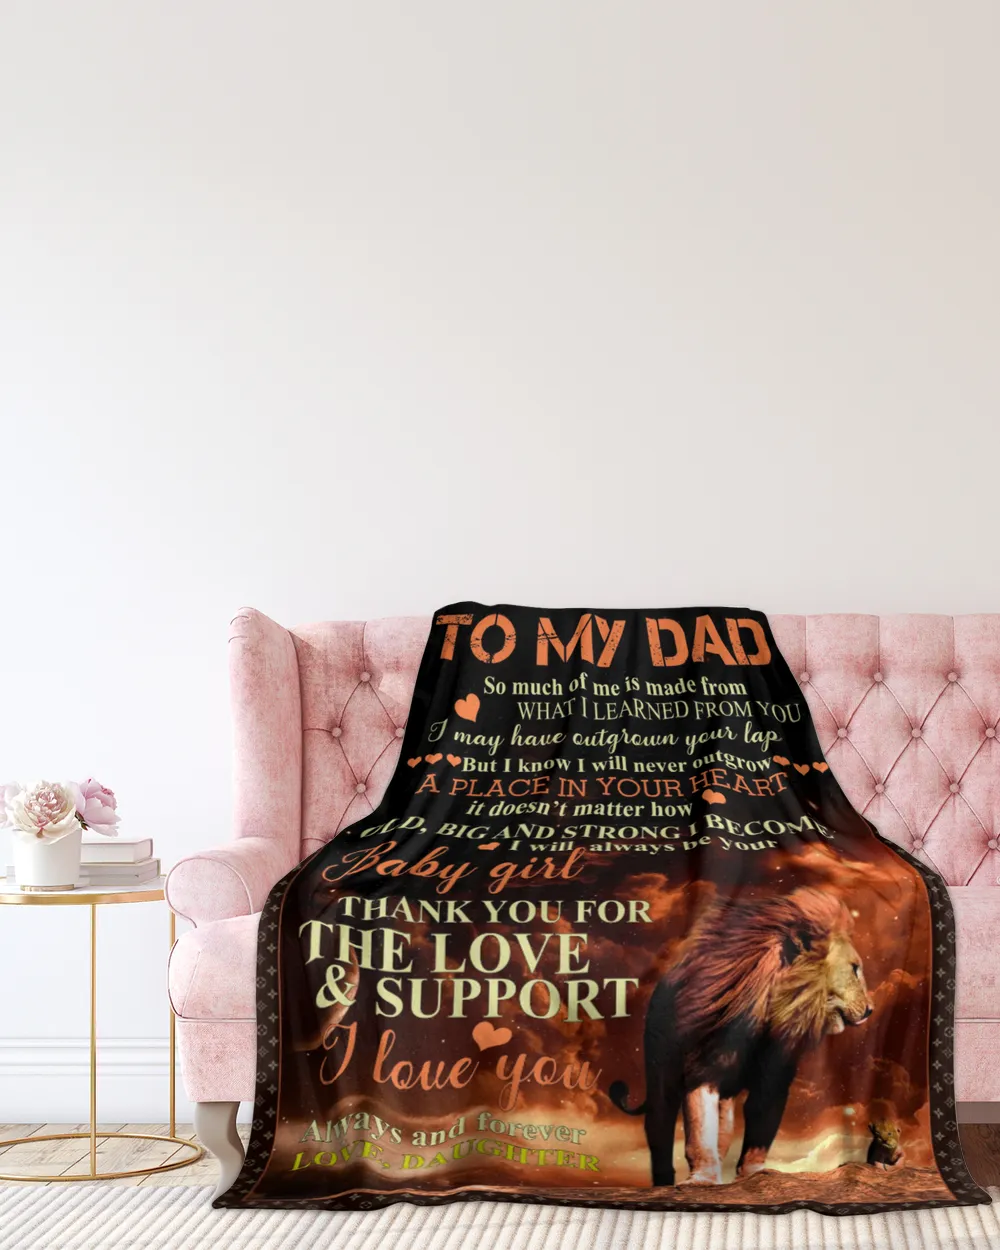 Father's Day Gifts, To My Dad From Daughter Papa Pop Dady Quilt Fleece Blanket